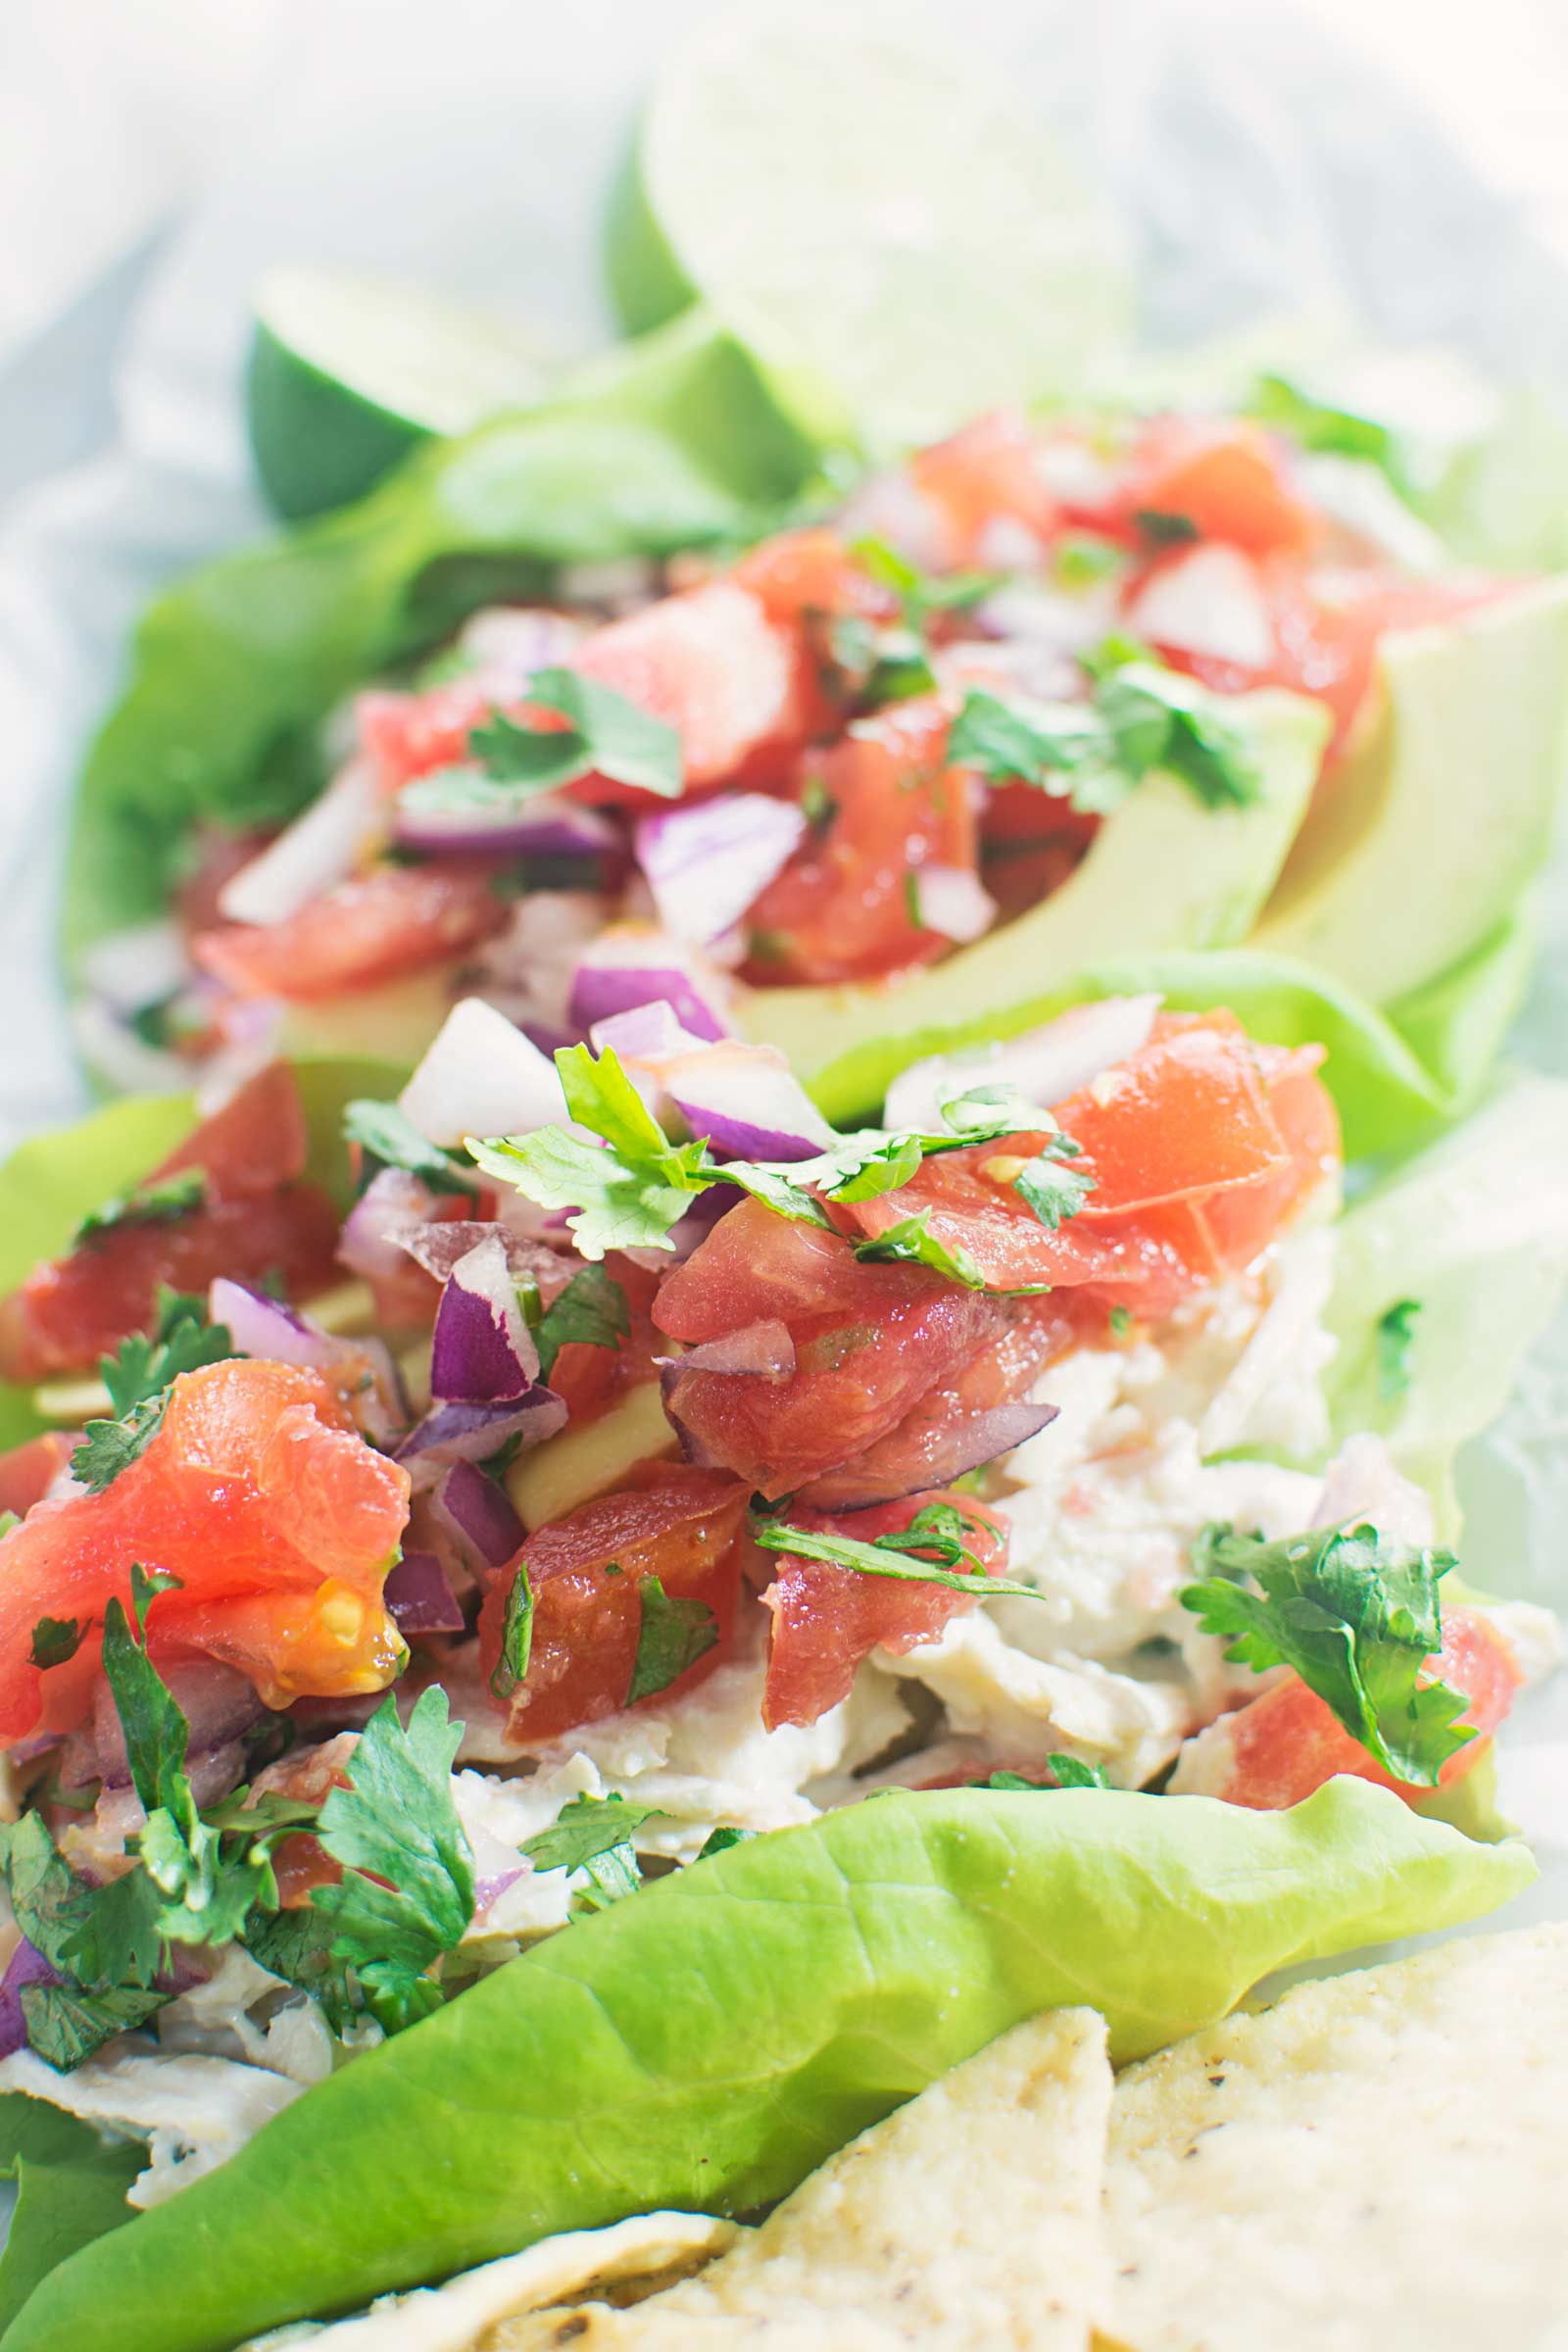 Mexican Chicken Salad with homemade Pico de Gallo served over lettuce.